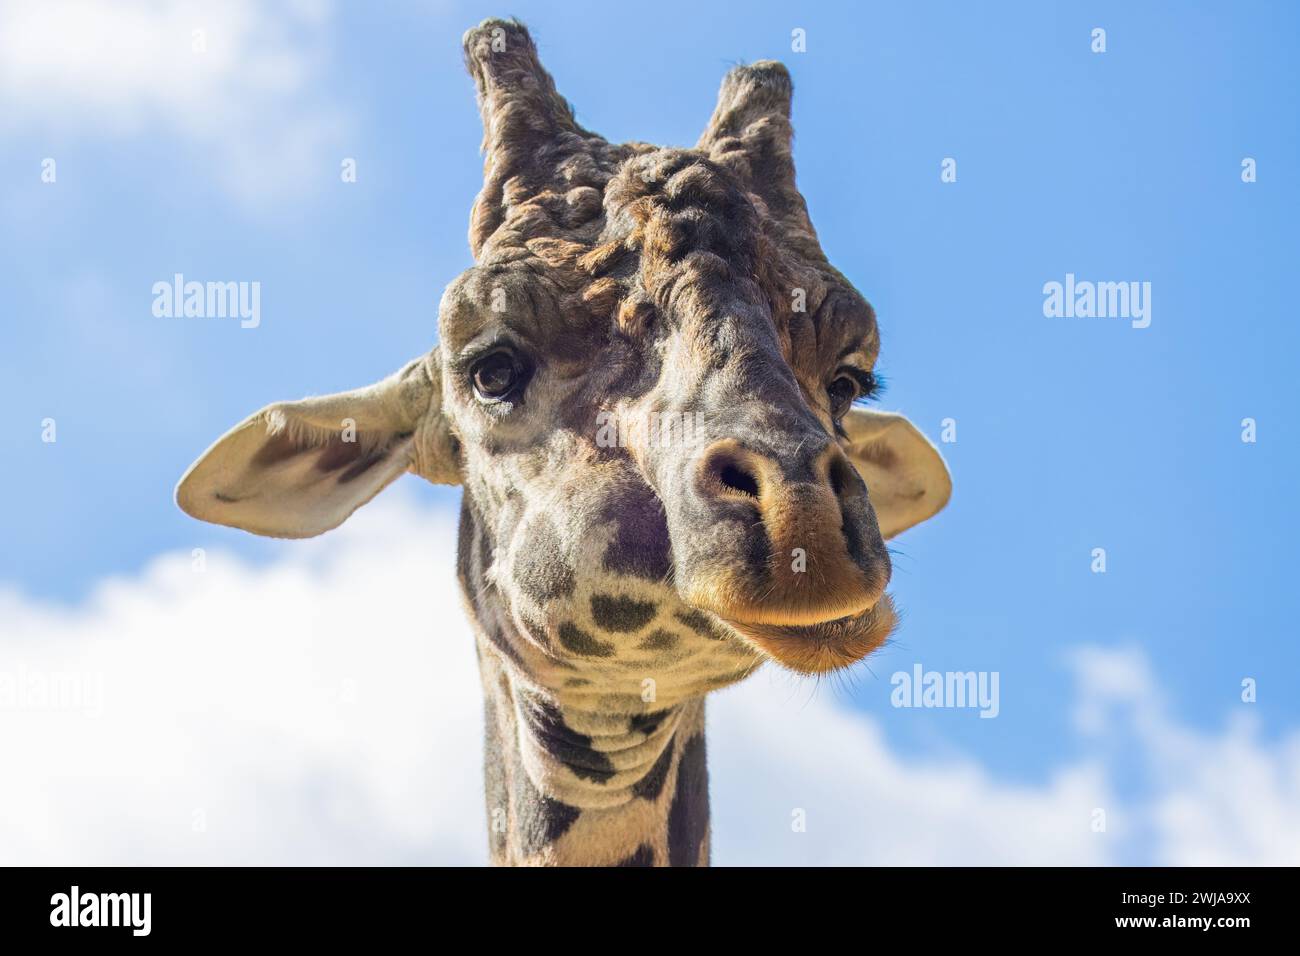 A funny portrait of a giraffe making eye contact with the camera Stock Photo